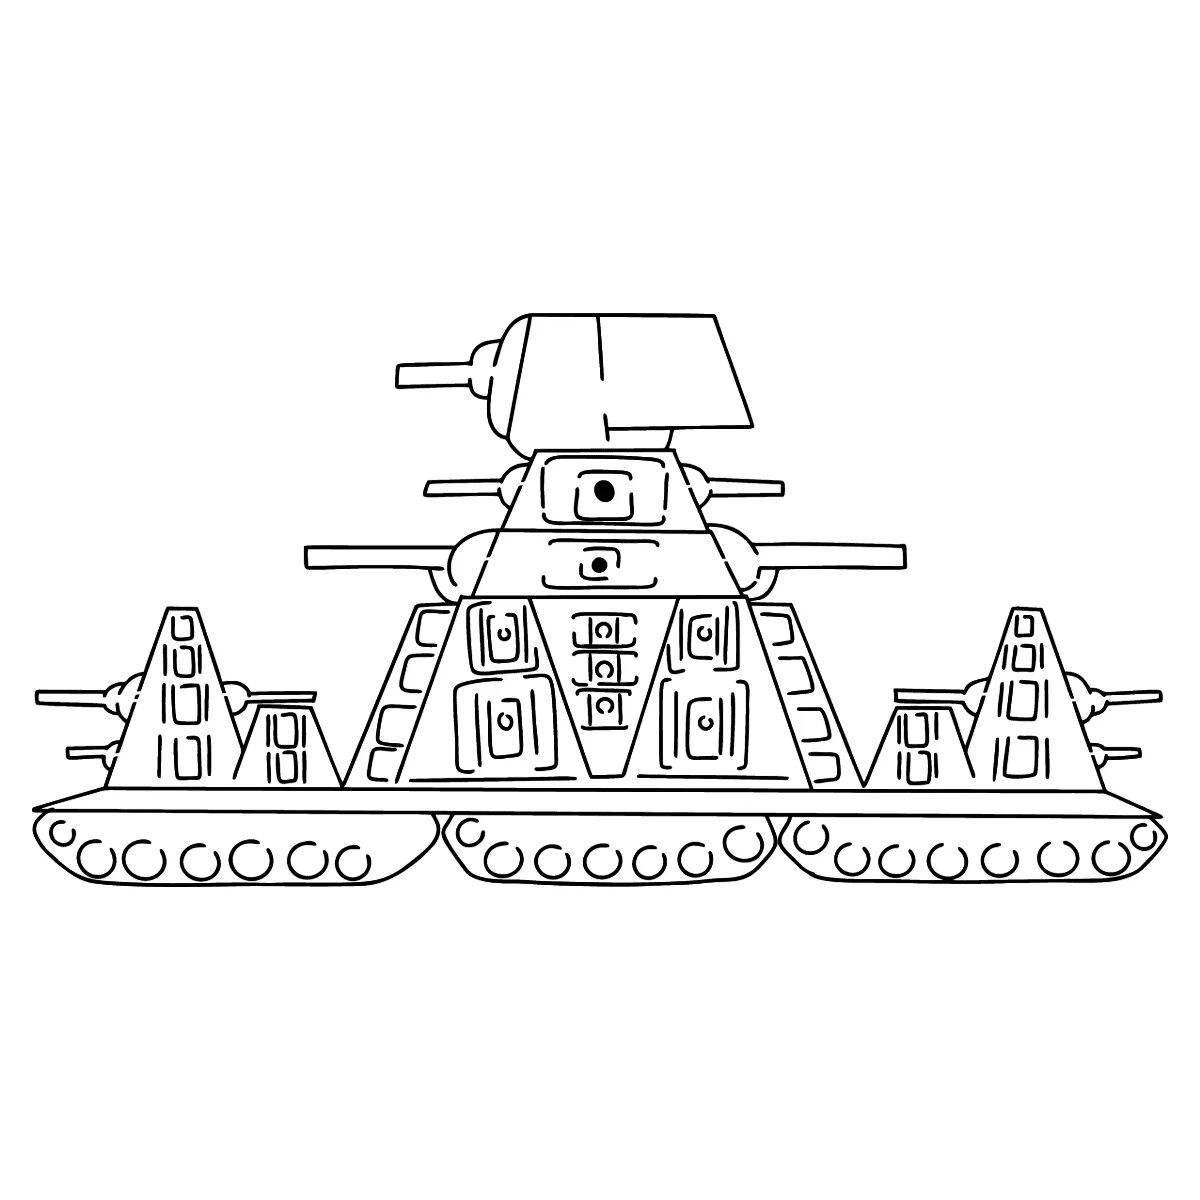 Tank kv 44 from cartoons about tanks #1